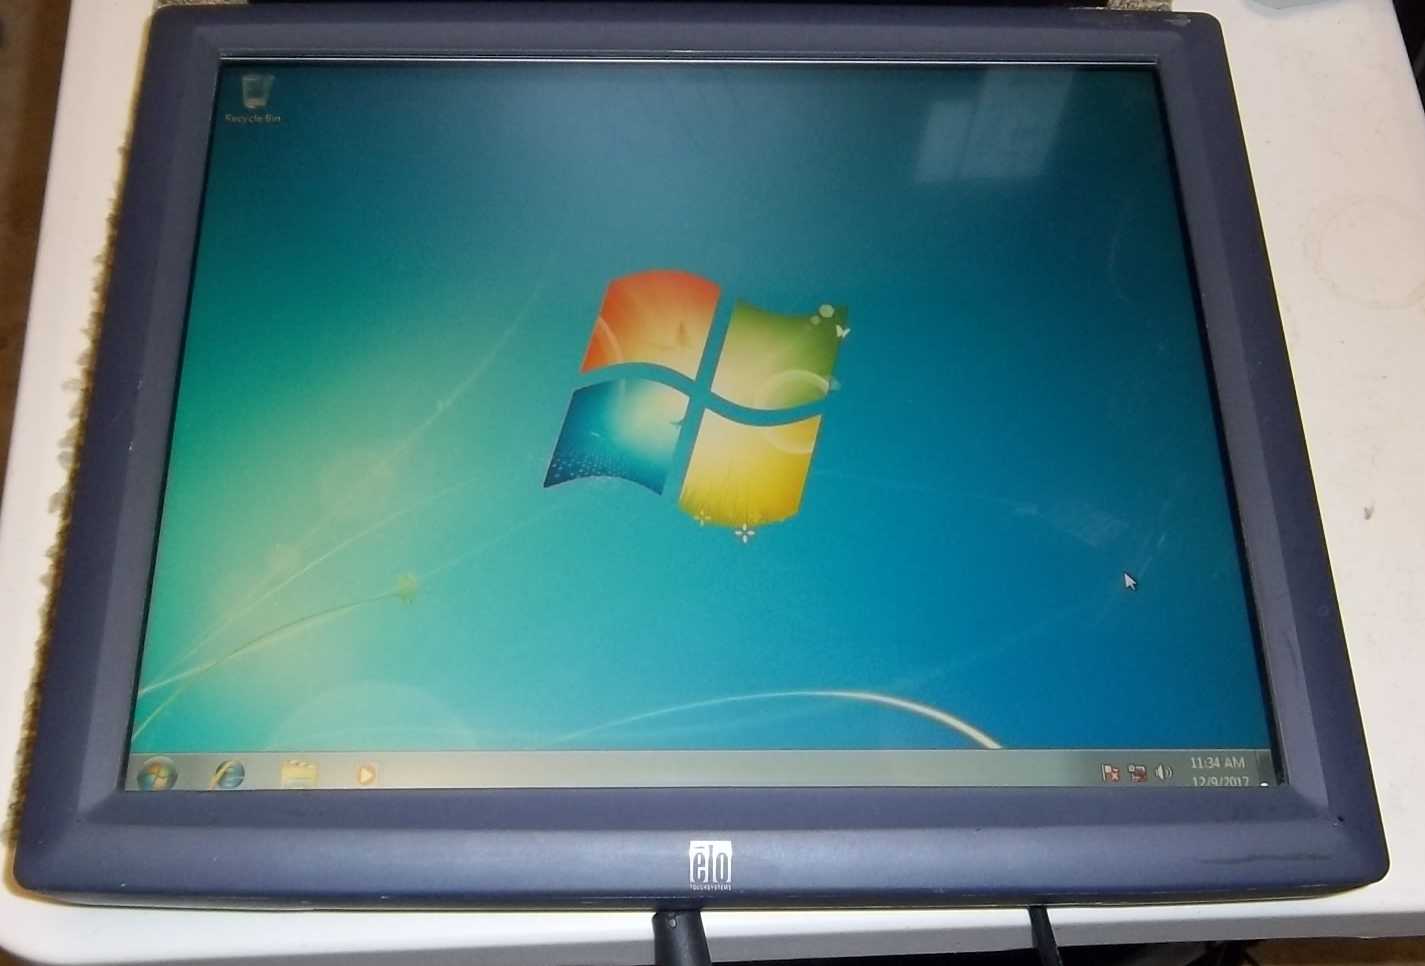 Used - 19 inch touch screen monitor ELO Touch Systems ET1920L 19 inch touch screen LCD monitors